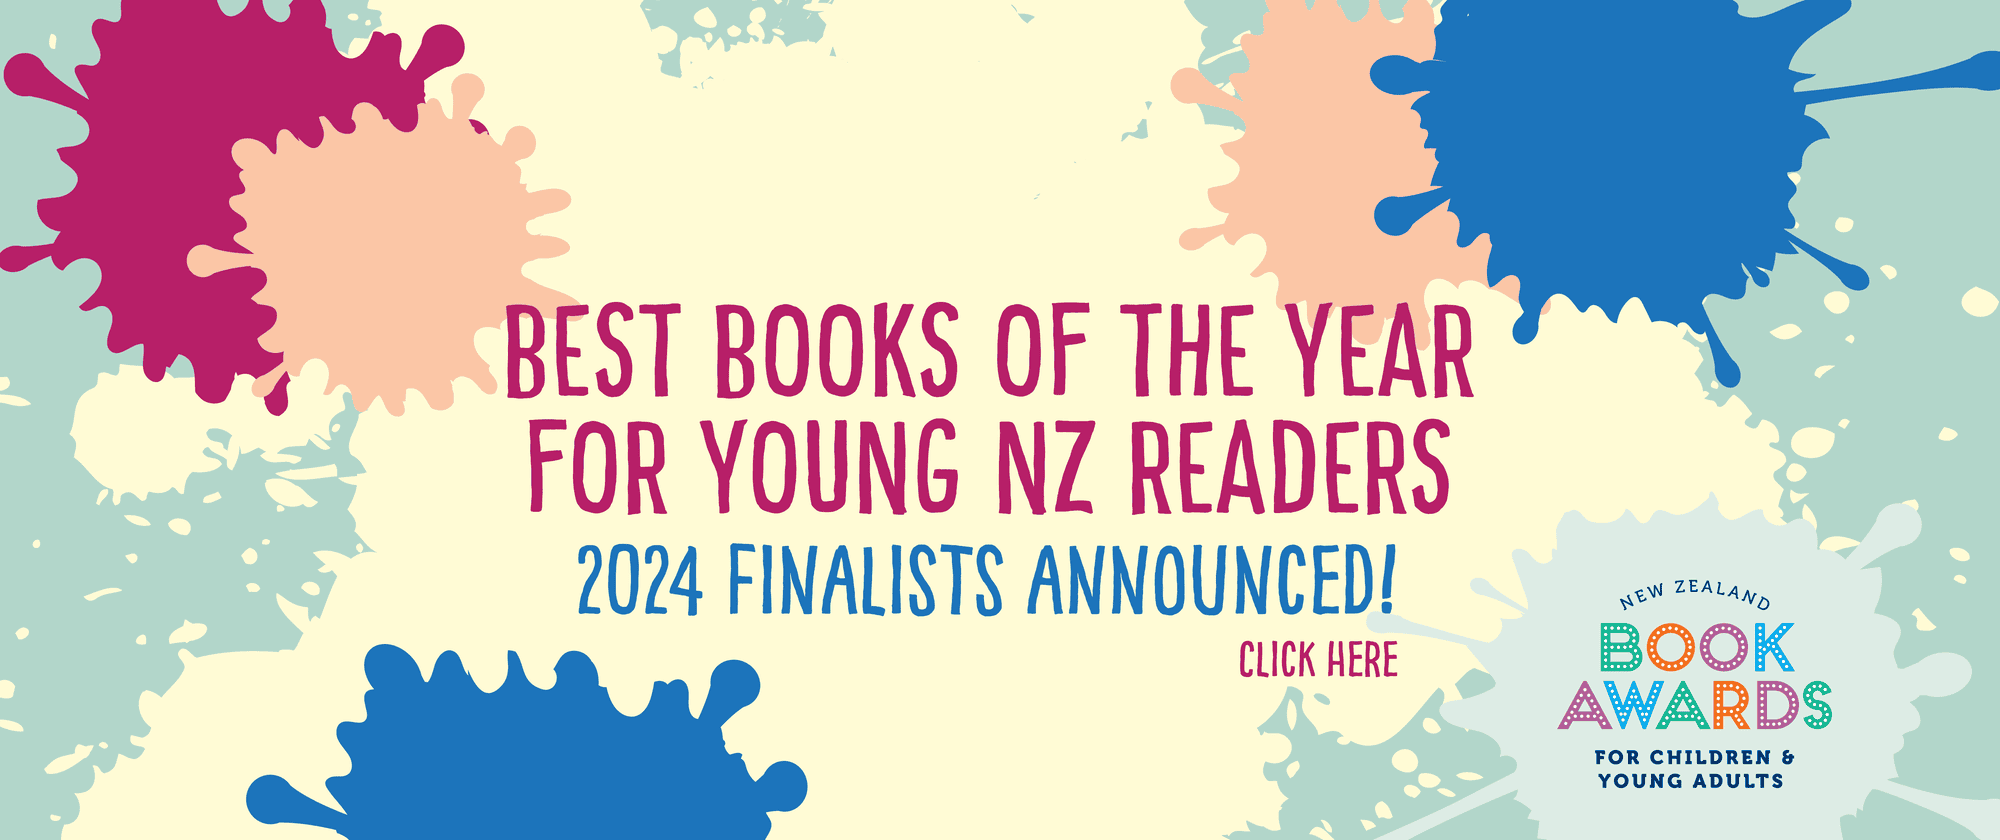 New Zealand Book Awards For Children And Young Adults - 2024 shortlist announced